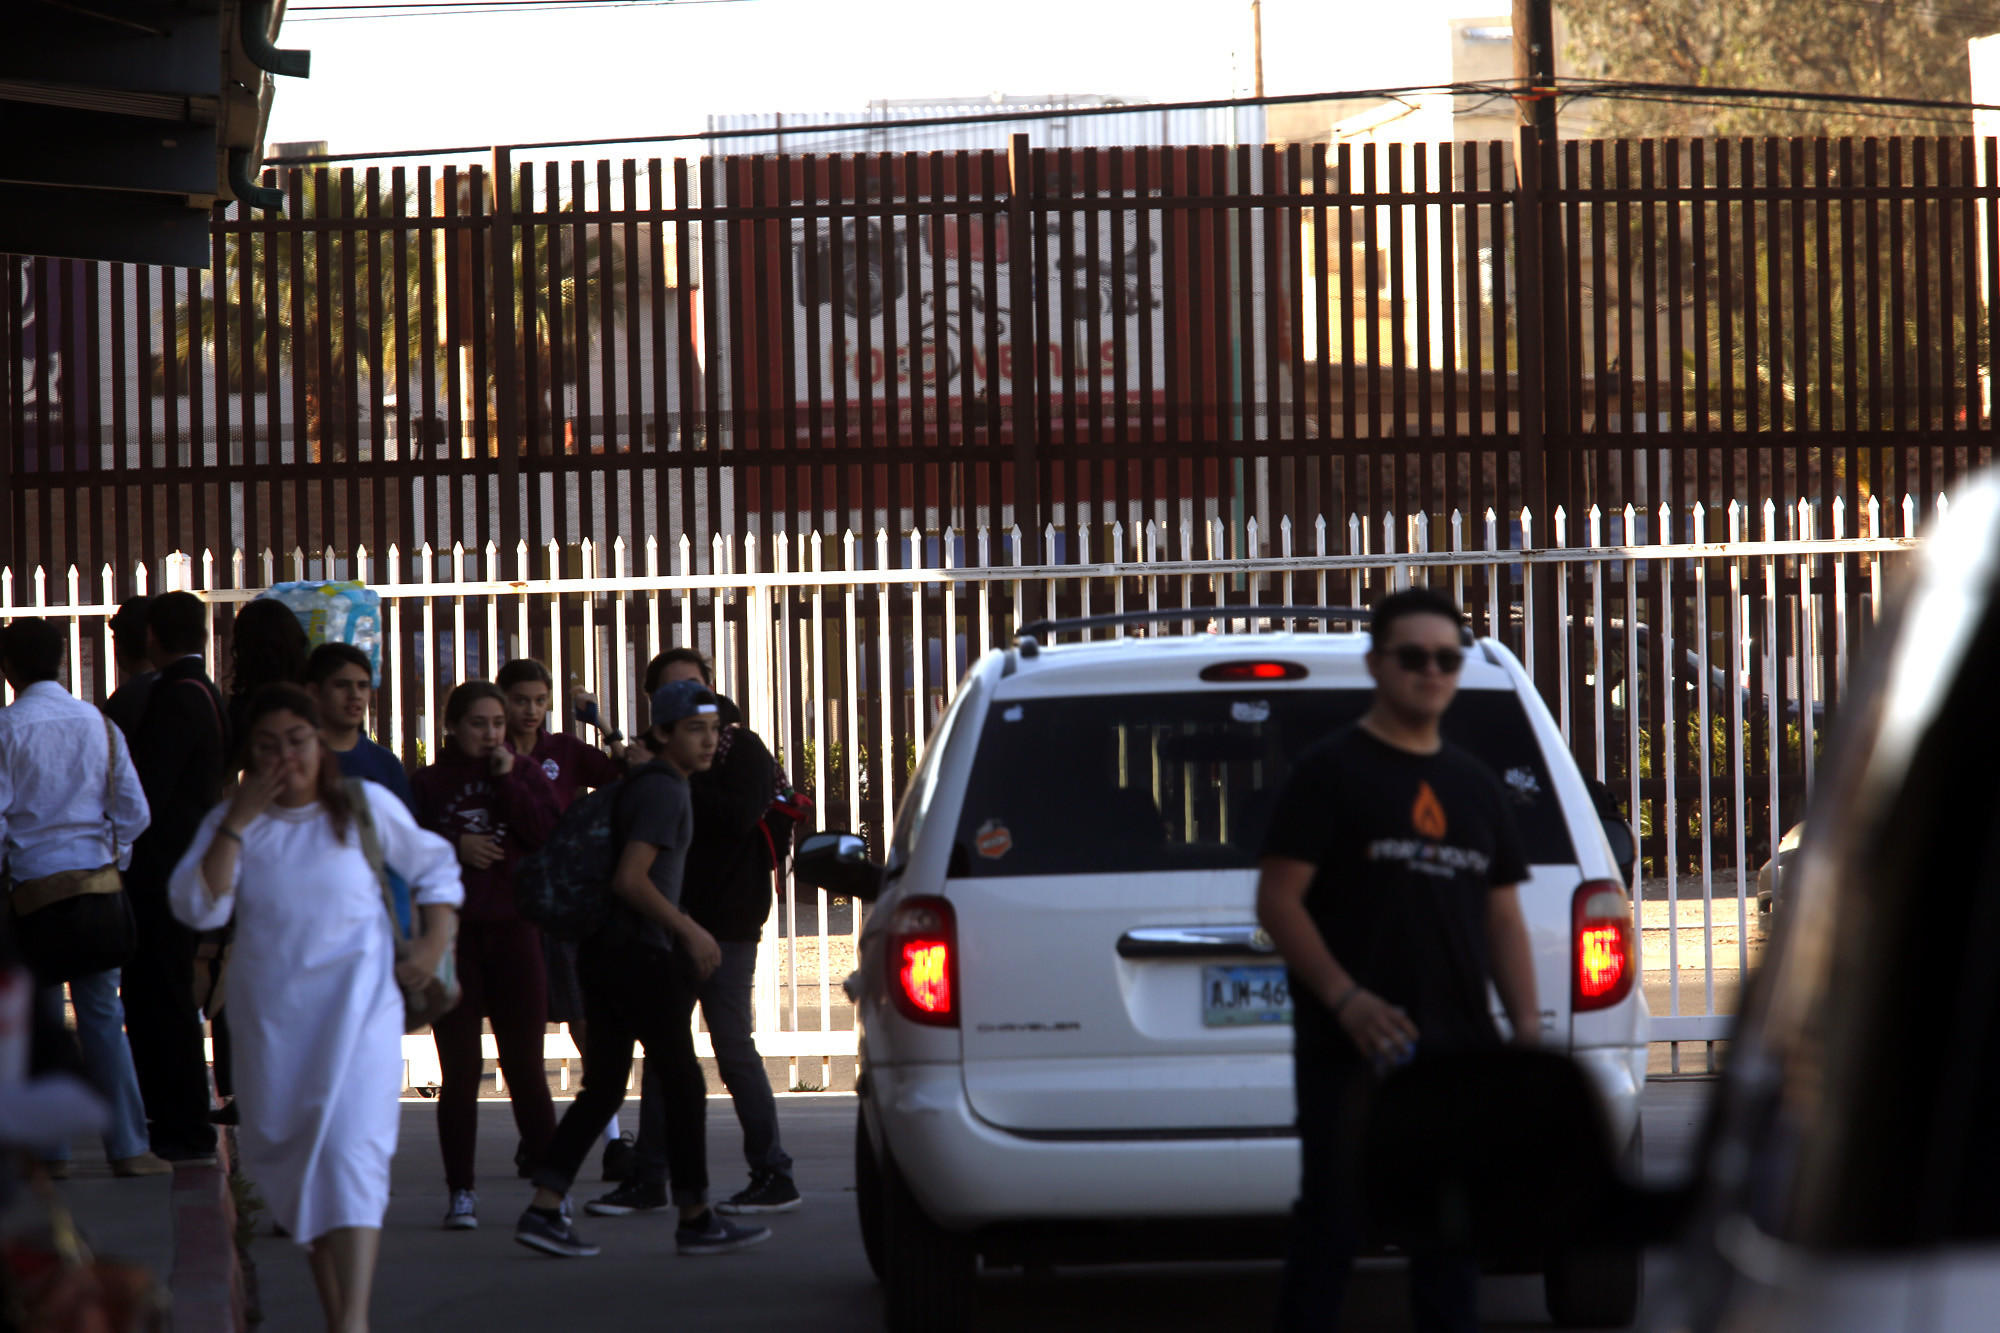 Students are dropped off and picked up in an area framed by the school fence in white and the brown U.S.-Mexico border fence.